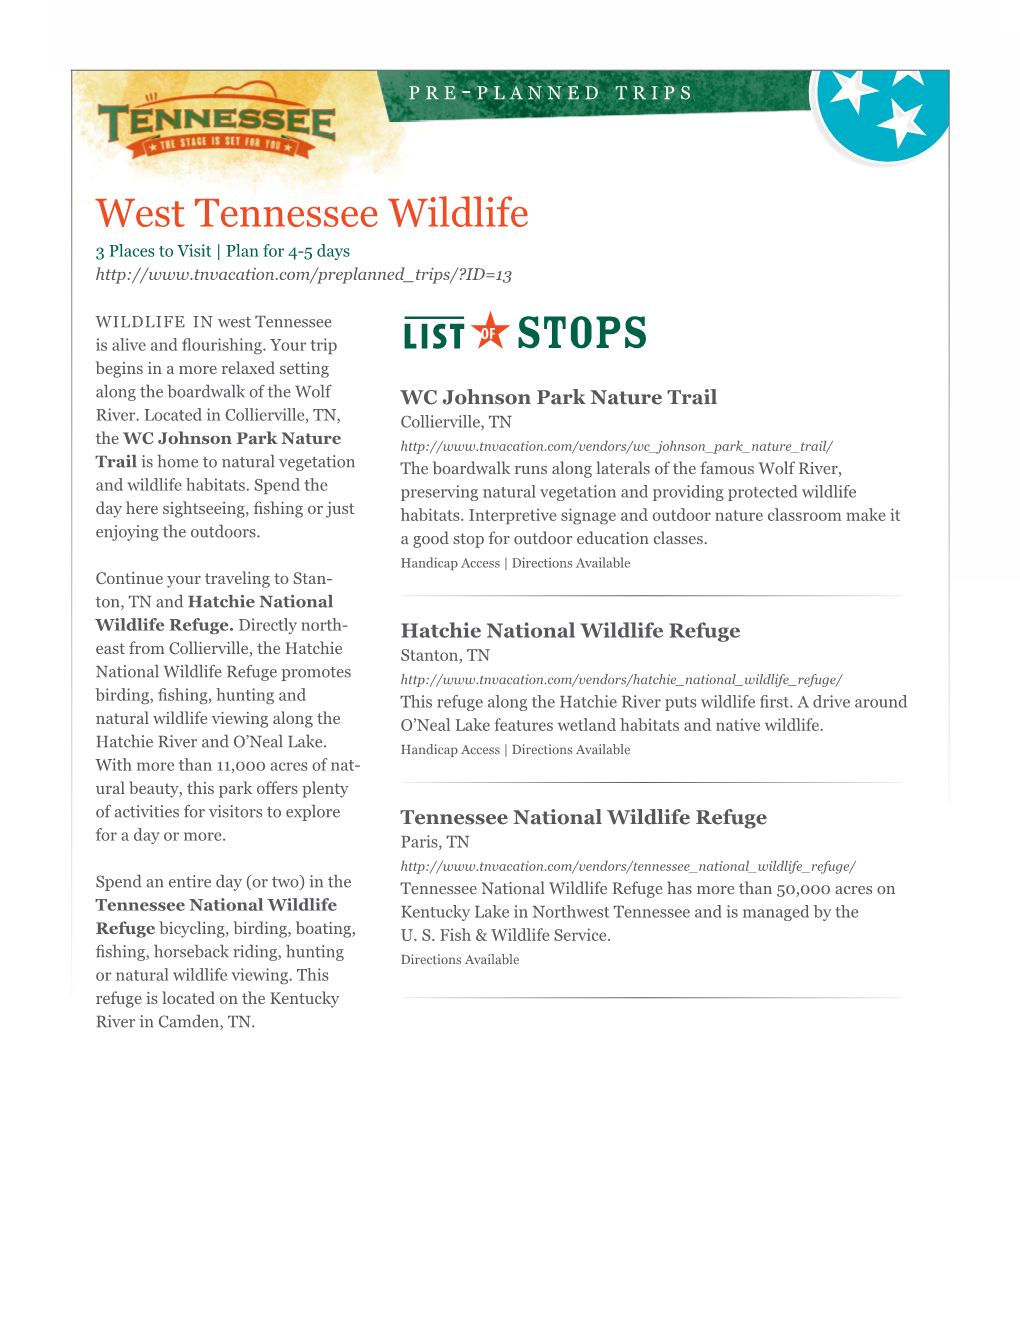 West Tennessee Wildlife 3 Places to Visit | Plan for 4-5 Days Wildlife in West Tennessee of Is Alive and Flourishing